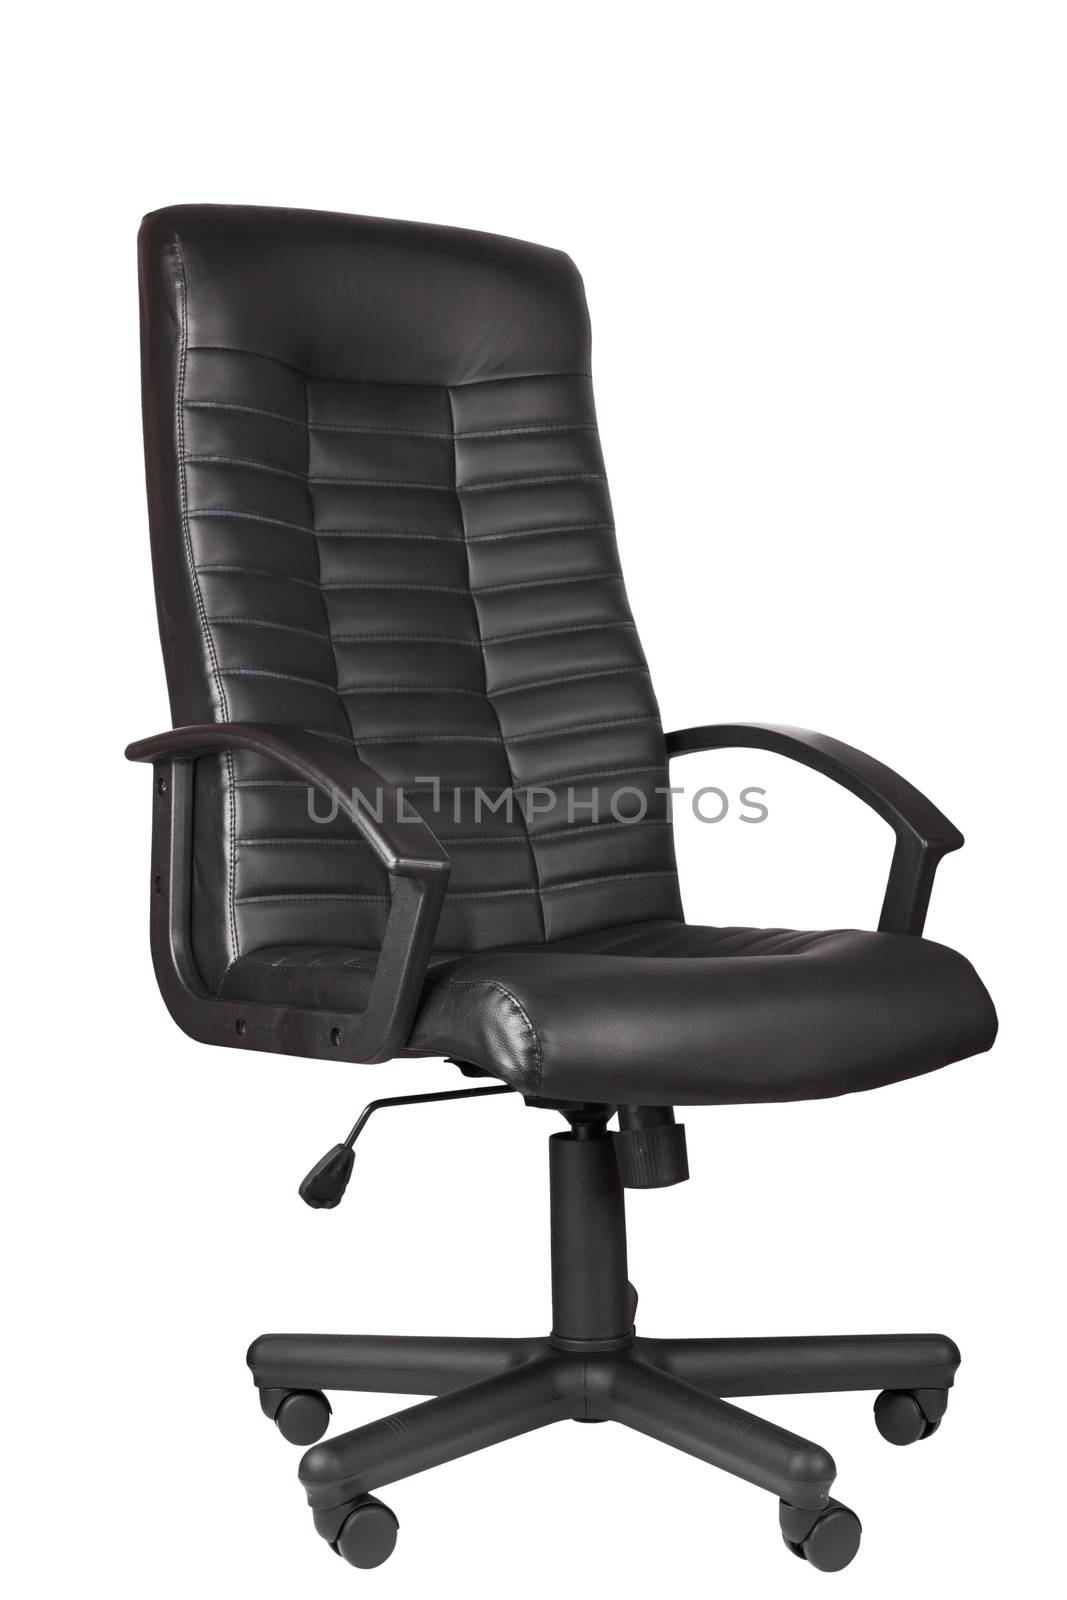 Black leather office chair on white background